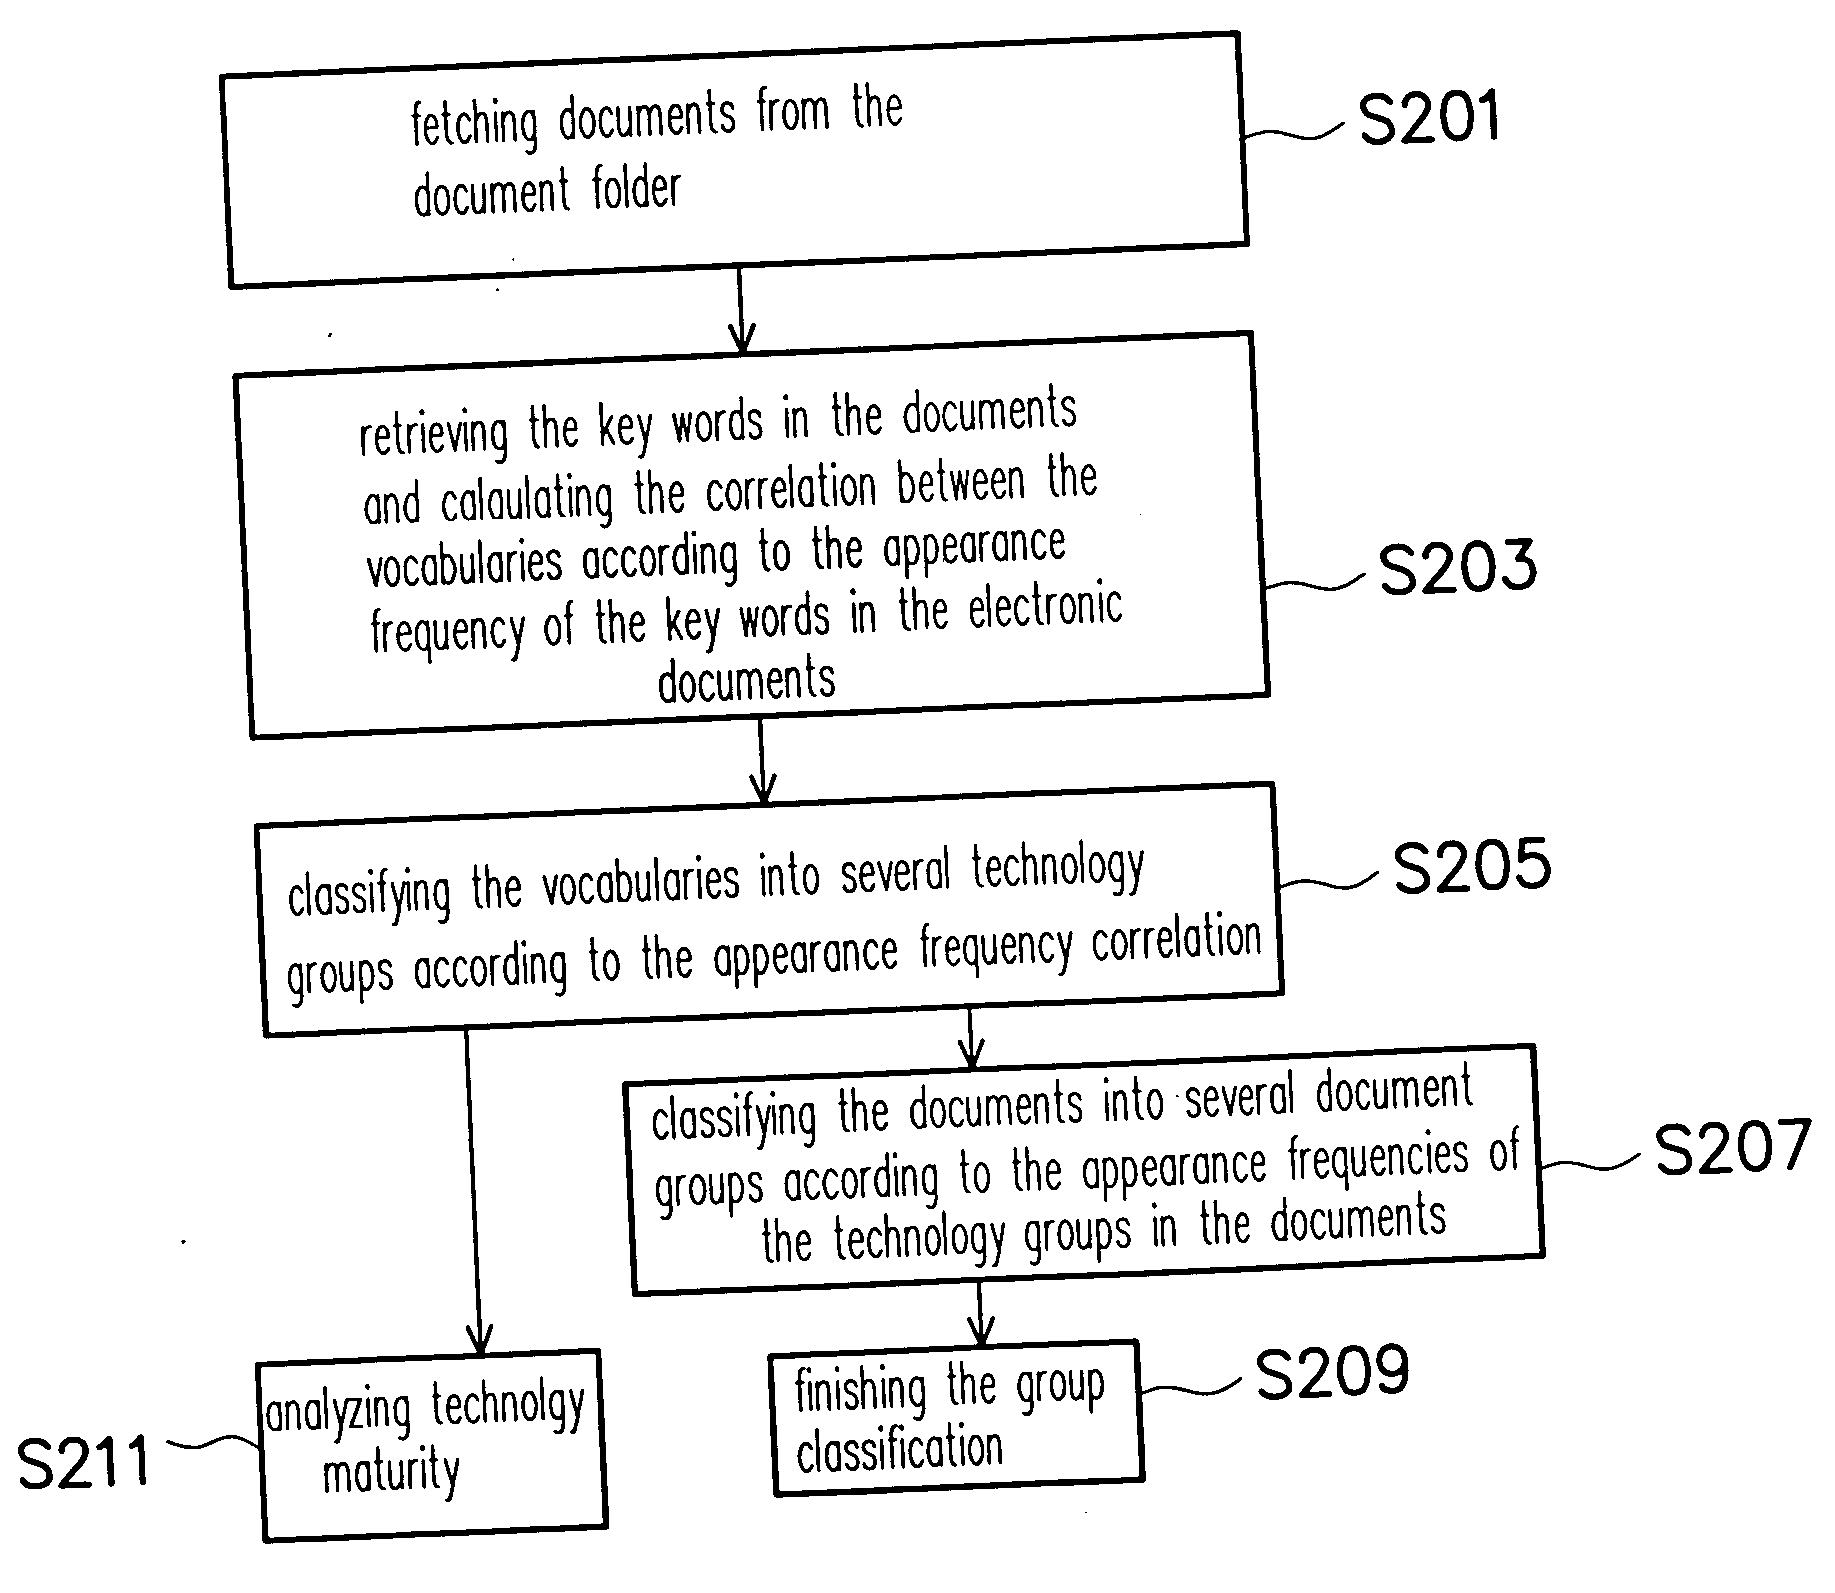 Method for analyzing and classifying electronic document